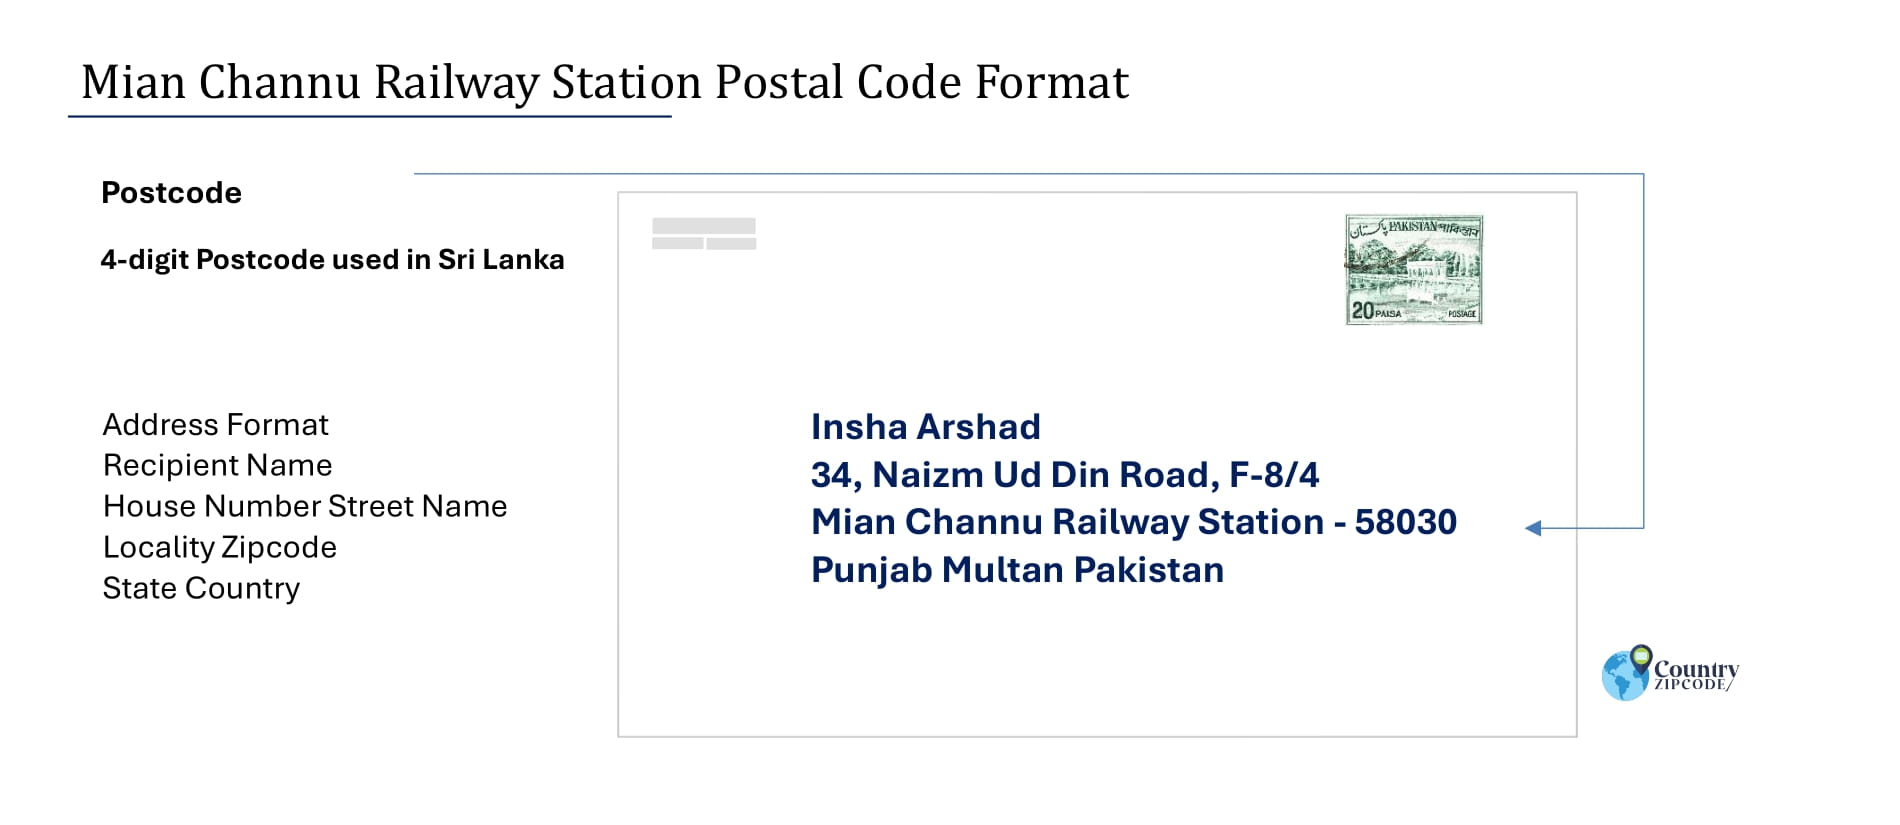 Example of Mian Channu Railway Station Pakistan Postal code and Address format